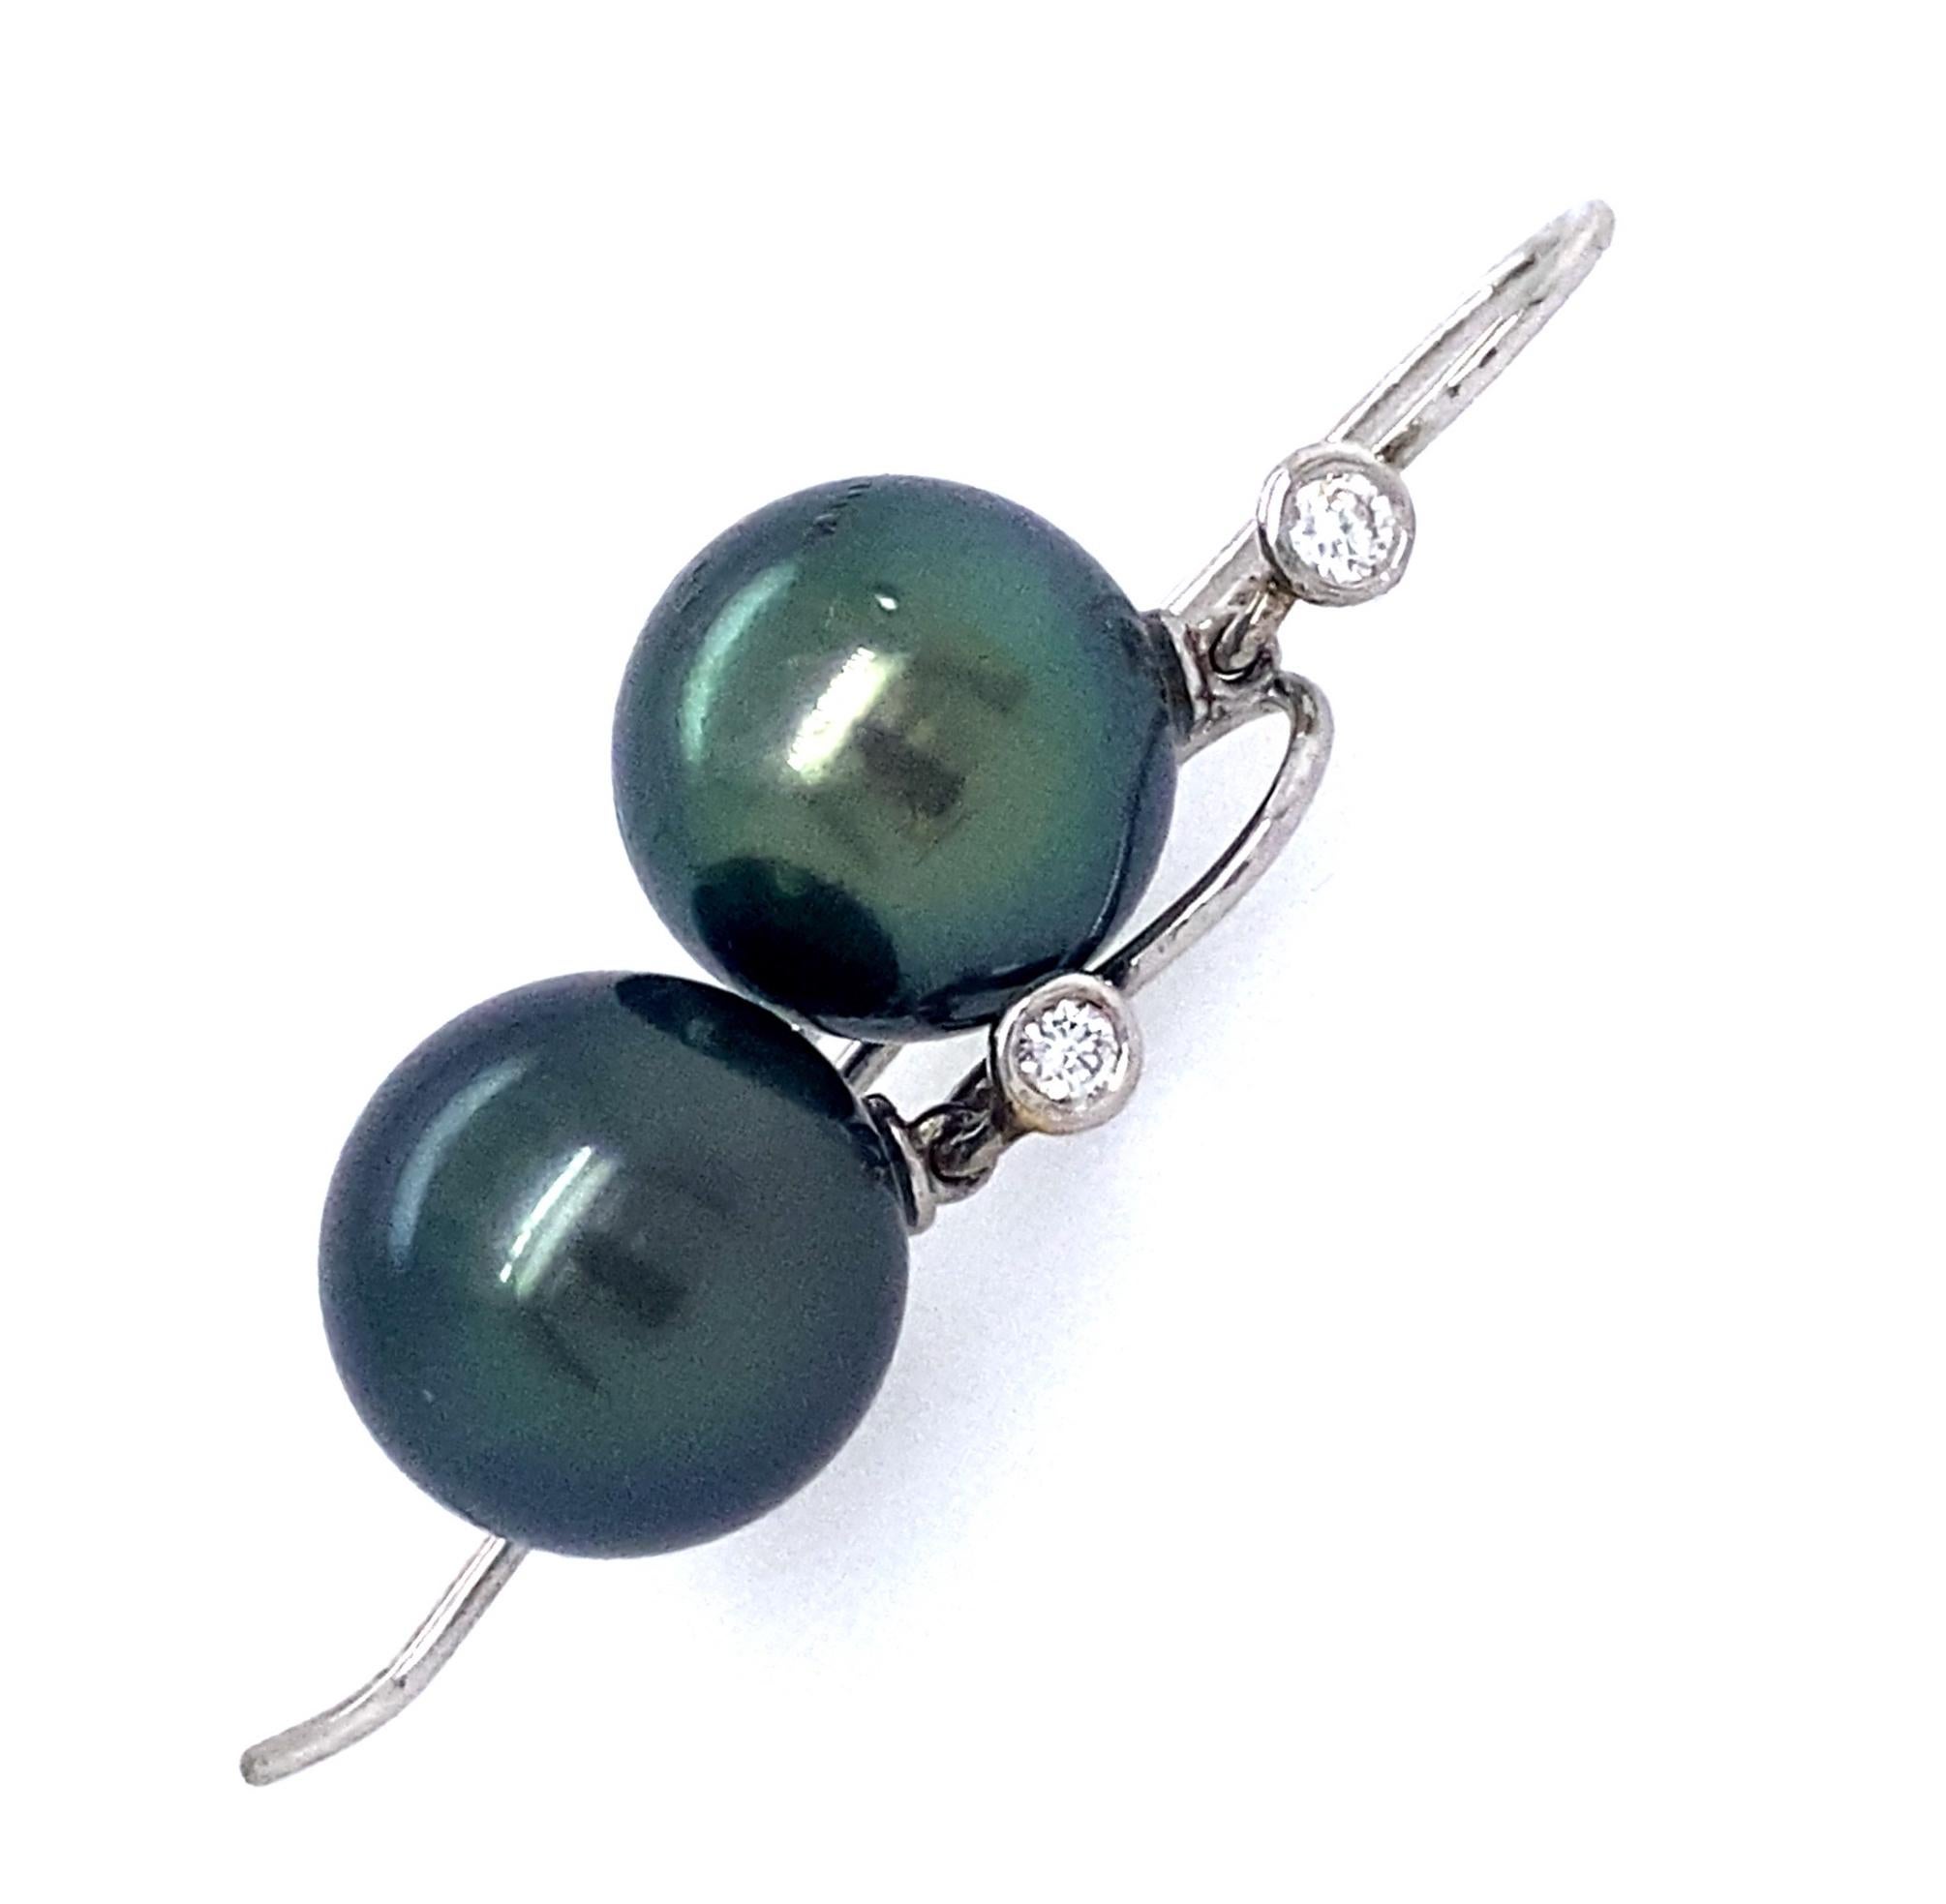 11mm Tahitian Black Pearl and Diamond Shepherds Hook Earrings in White Gold In New Condition For Sale In Sherman Oaks, CA